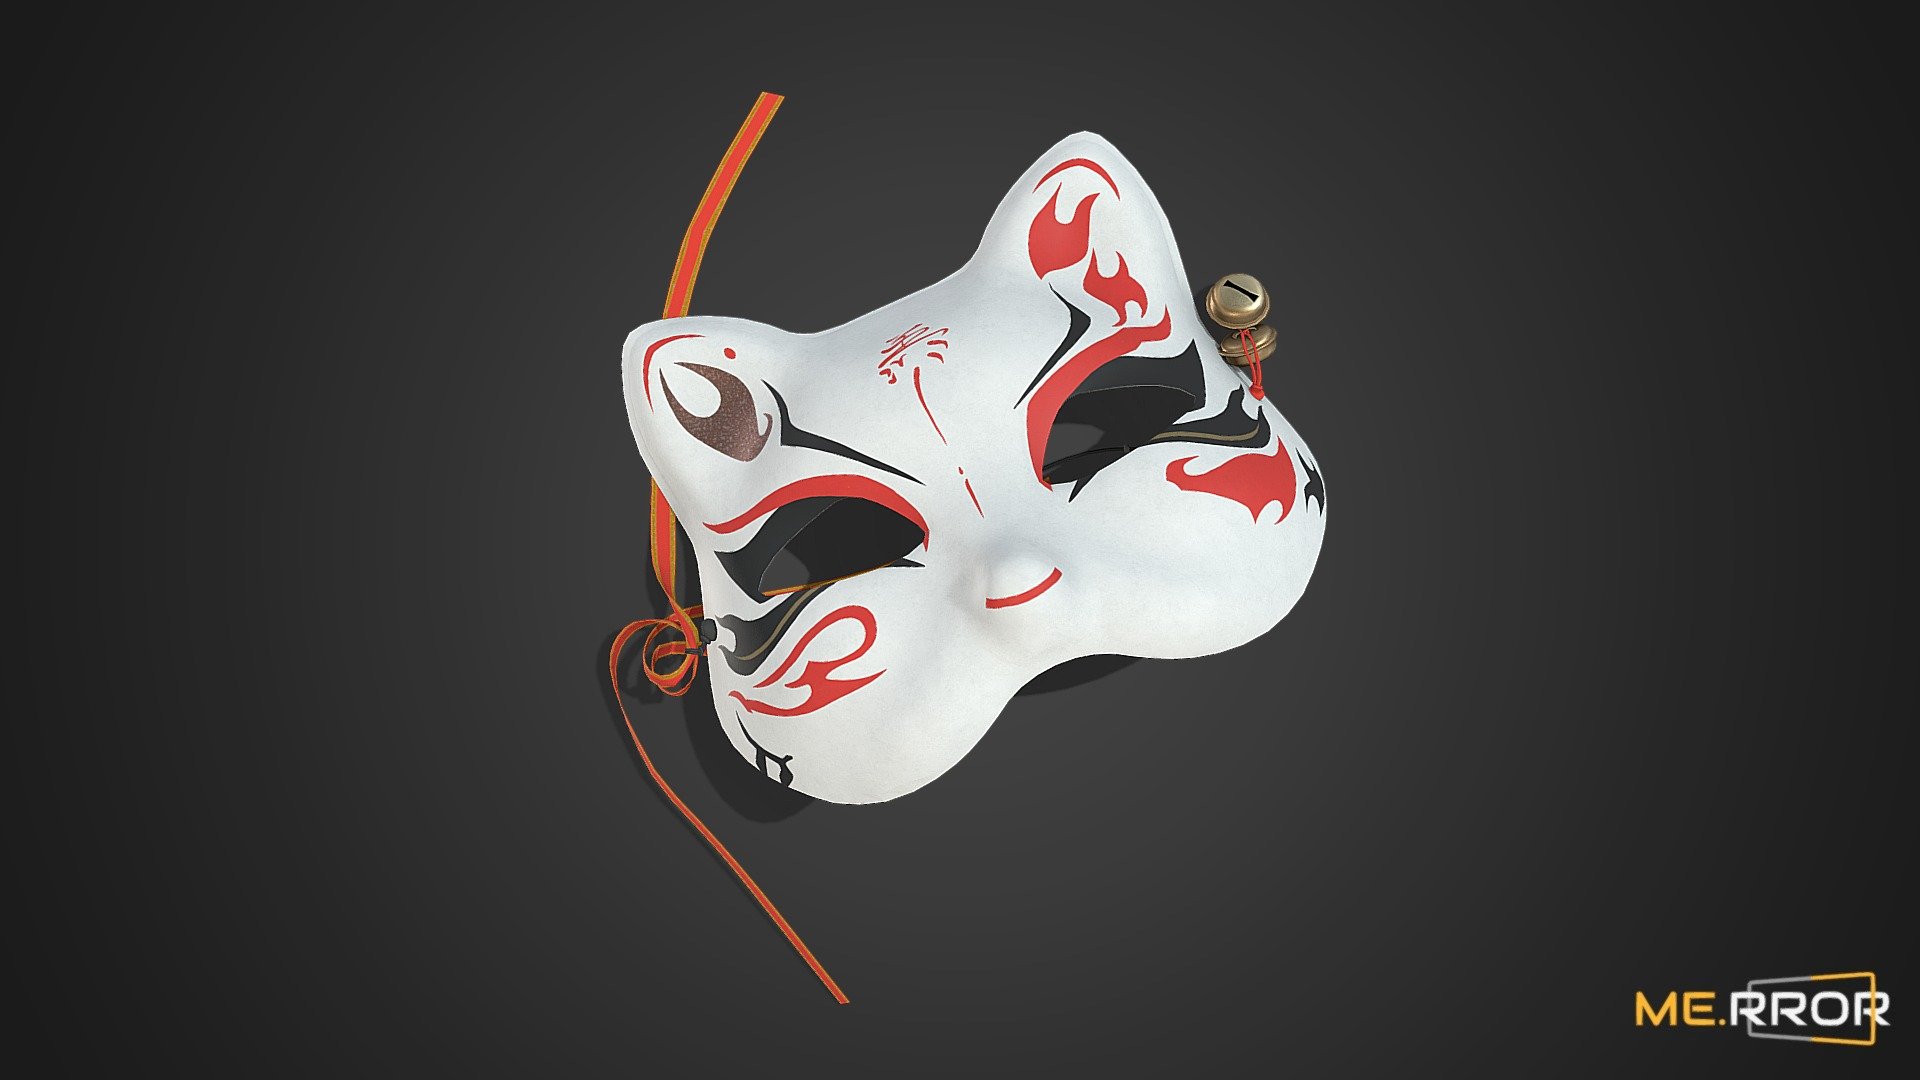 MERROR is a 3D Content PLATFORM which introduces various Asian assets to the 3D world


3DScanning #Photogrametry #ME.RROR - [Game-Ready] Japanese Fox Mask Kitsuneman - Buy Royalty Free 3D model by ME.RROR Studio (@merror) 3d model